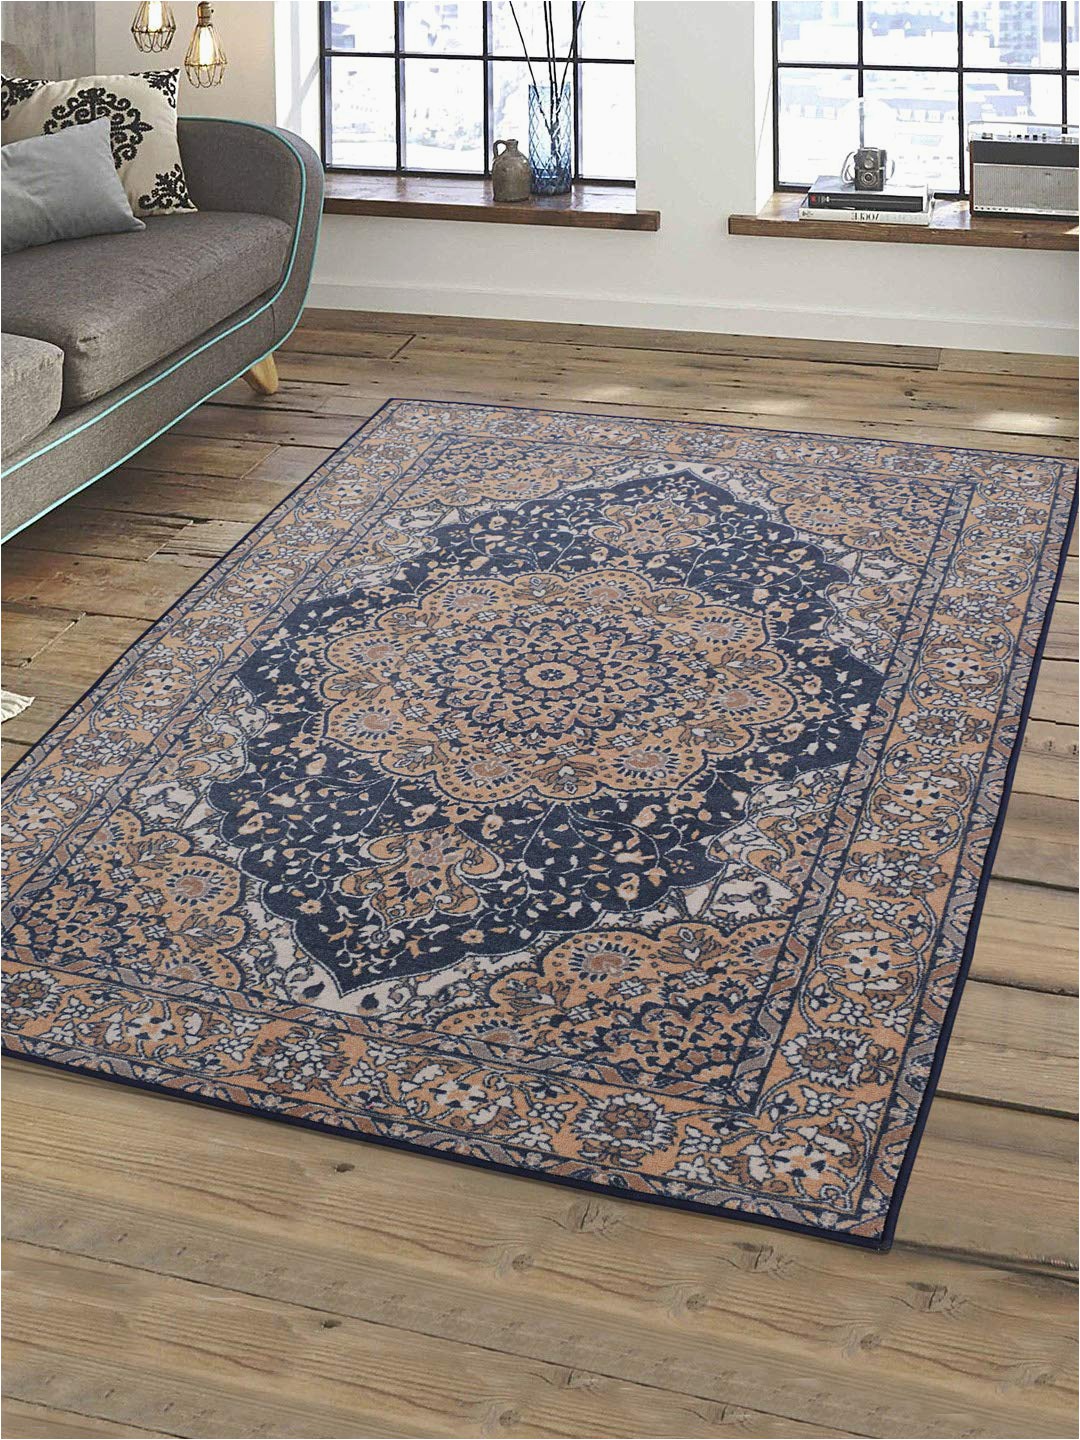 4×6 Non Skid area Rug Buy Rugsmith solid Pattern 4 X 6 Feet area Rug Line at Low